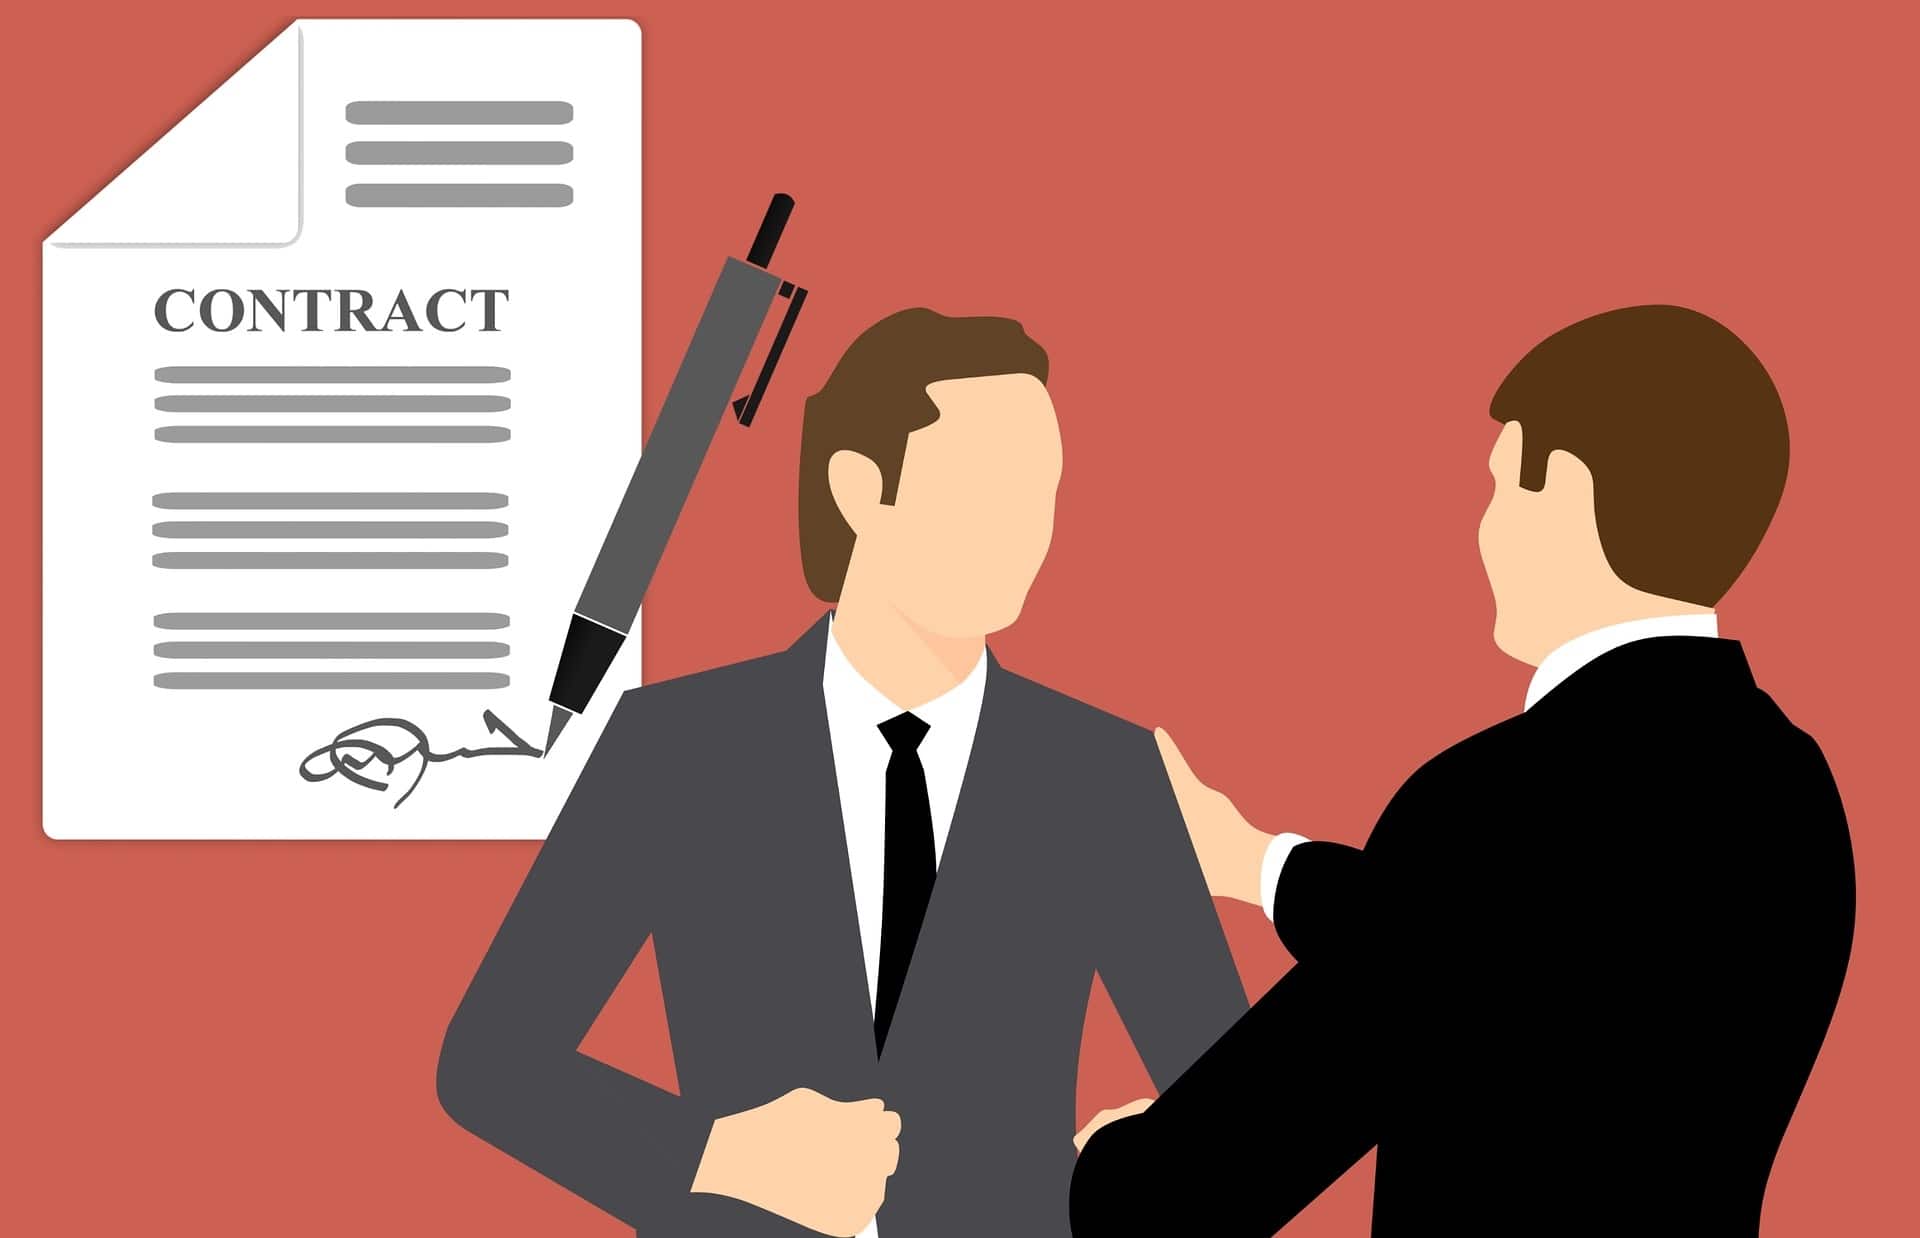 Illustration of two business men closing a deal and using a Contract as part of a strategic partnership